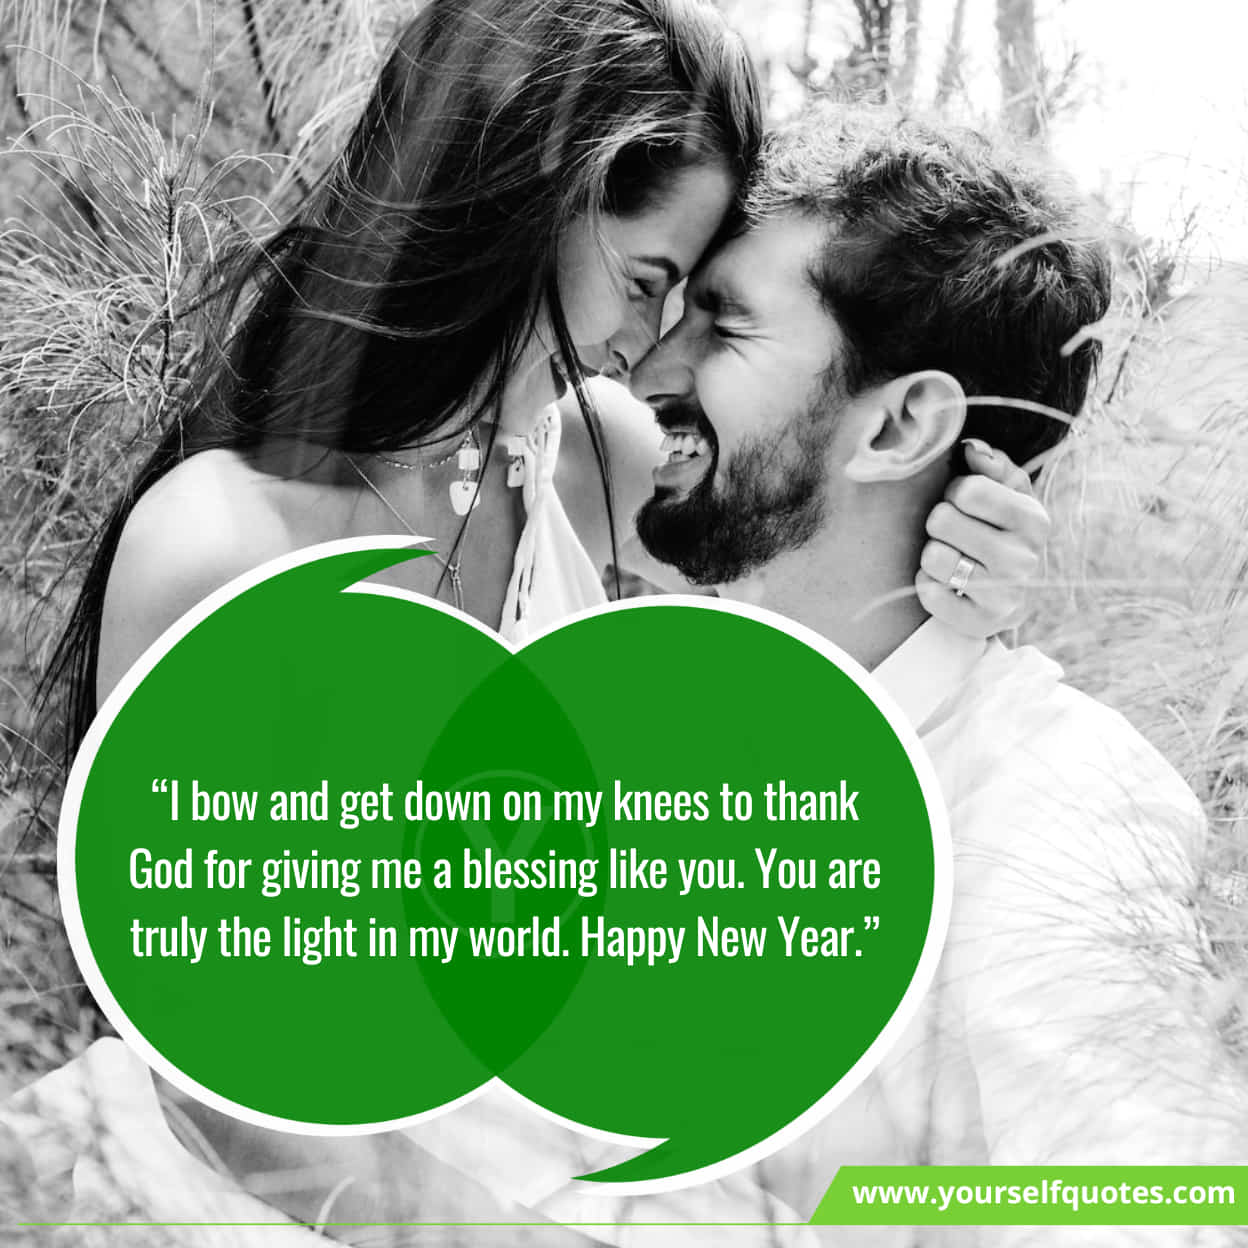 143 Romantic New Year Wishes To Make New Year Eve Special